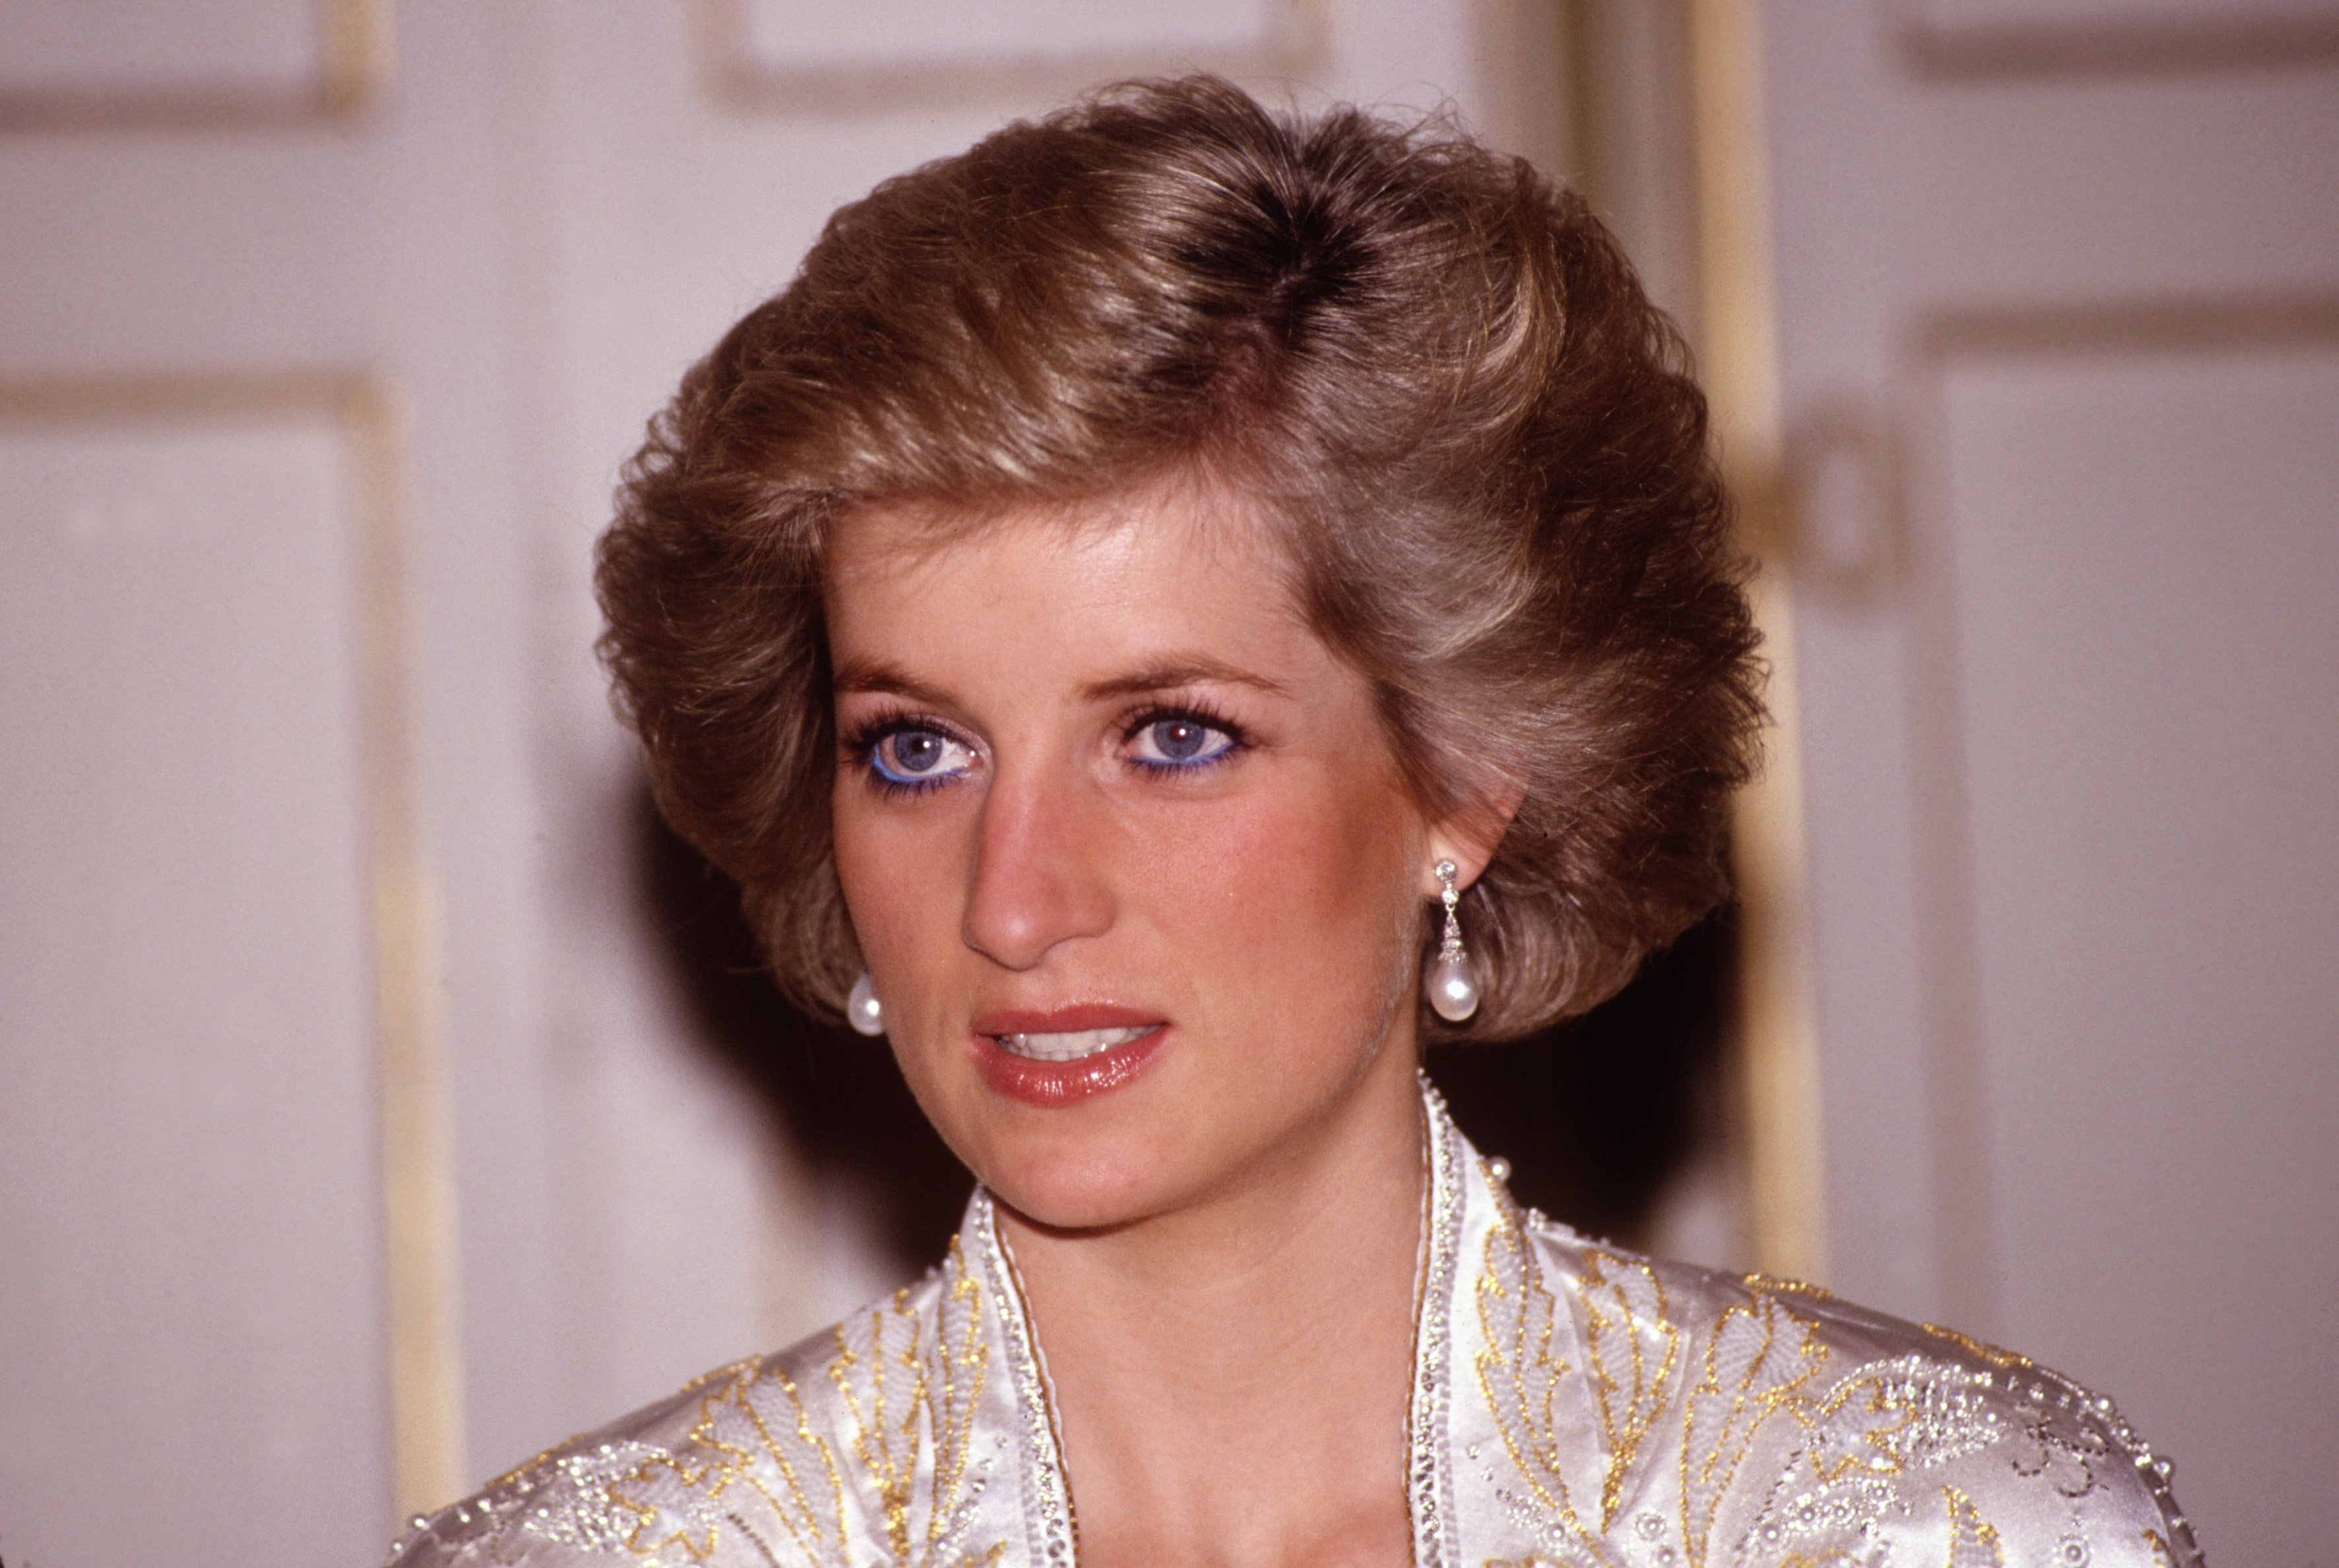 Diana Princess in November 1988 at the Elysee Palace in Paris, France |  Source: Getty Images